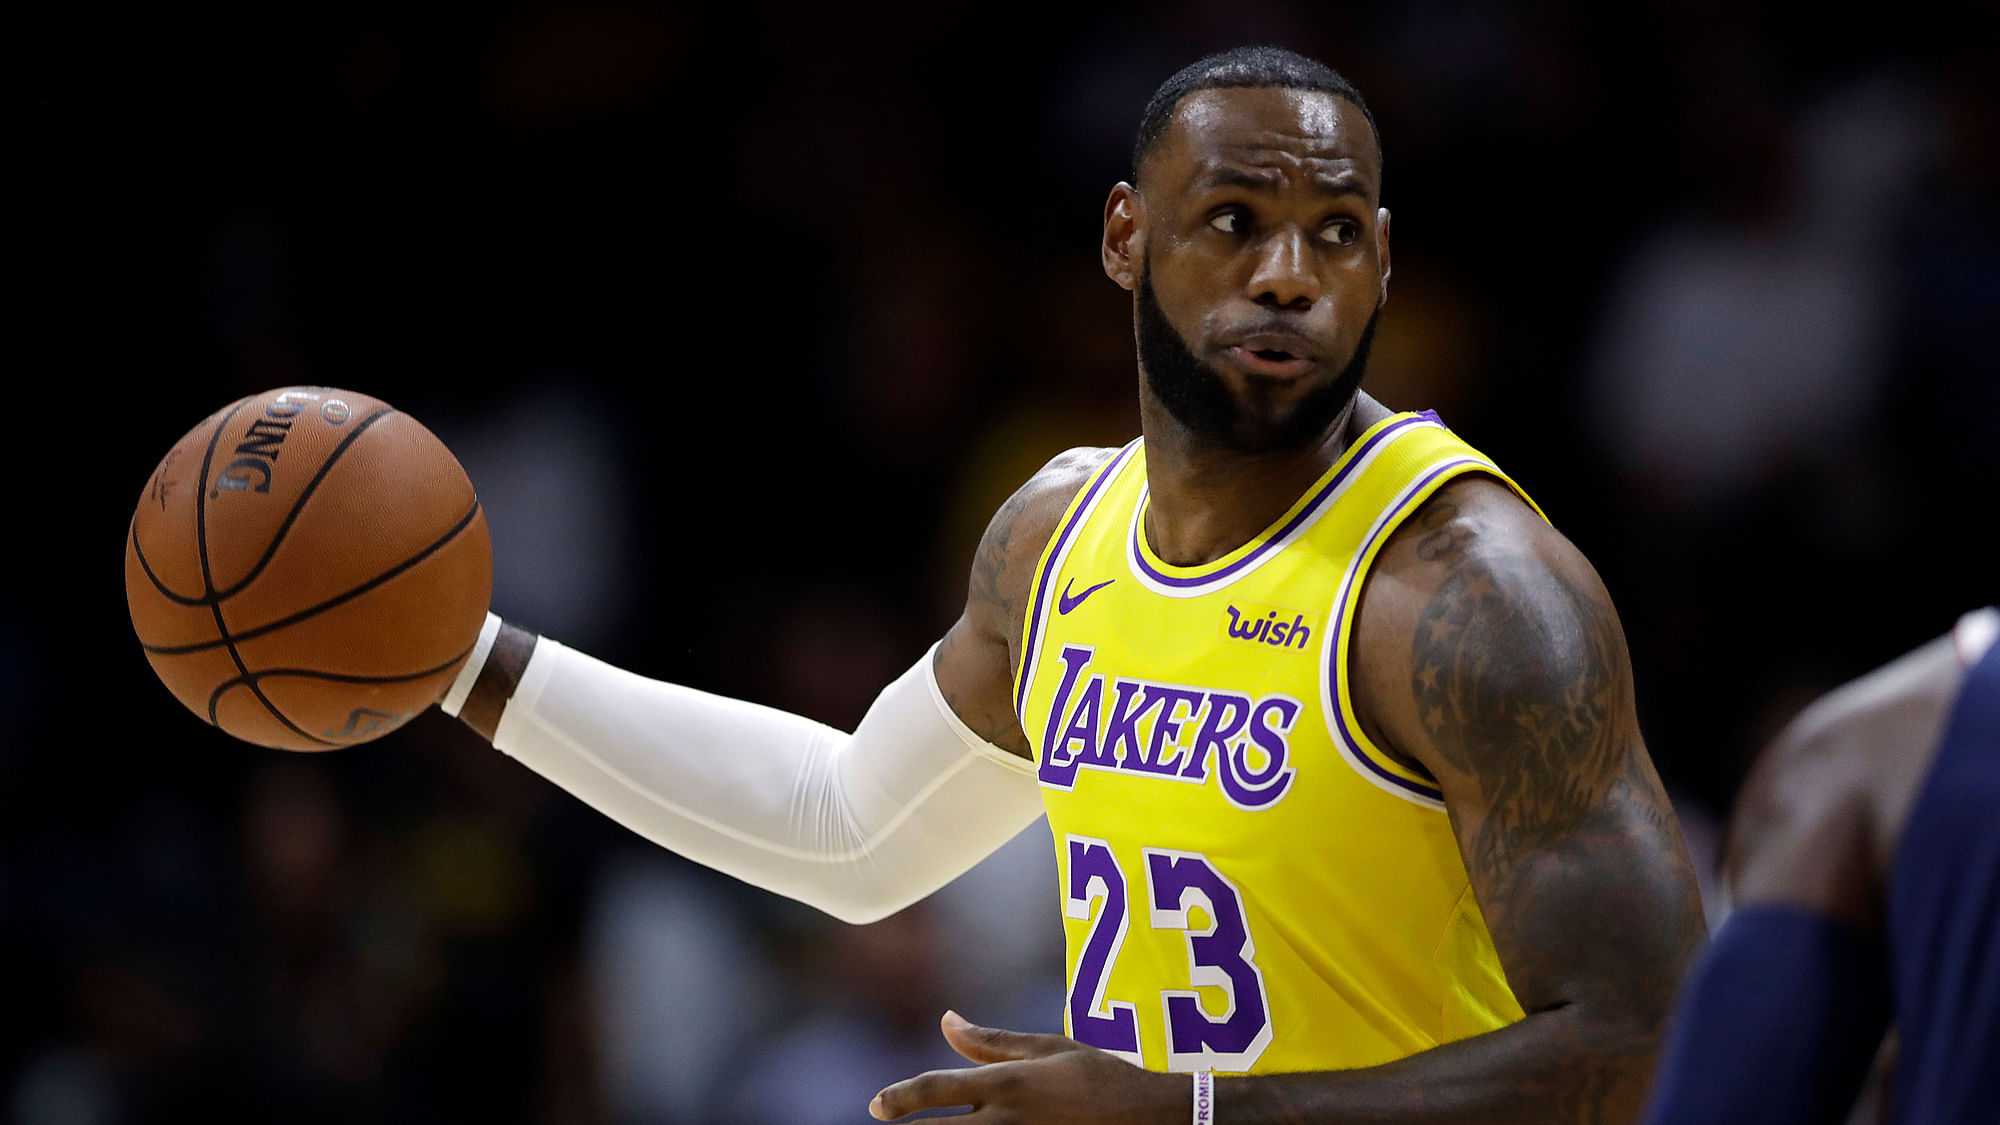 LeBron James simply scoffs at the notion he’s thinking about anything but his day job as he begins the next chapter in one of the greatest careers in NBA history.